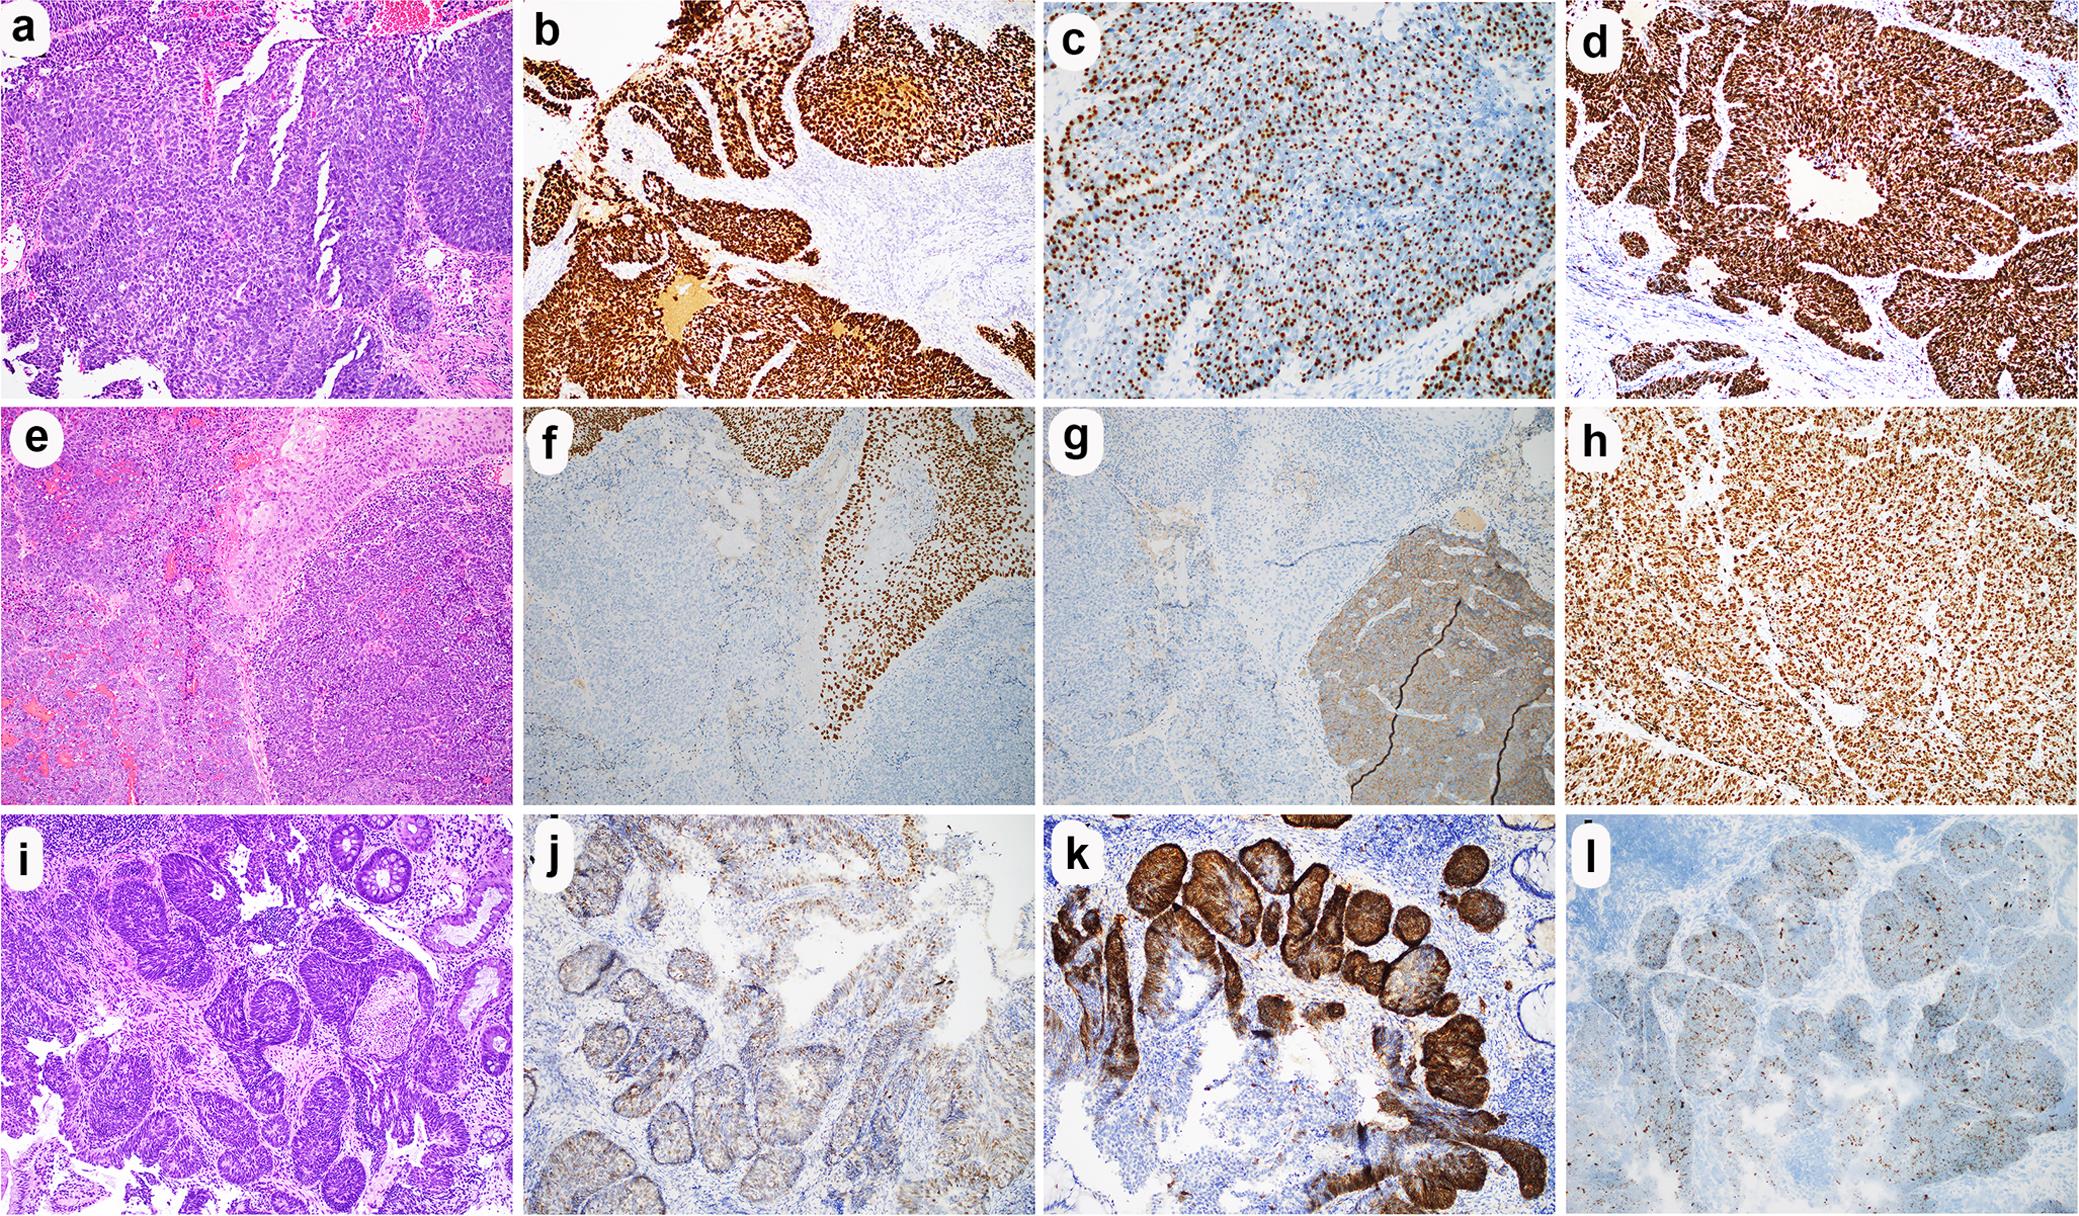 Comparisons between anal squamous cell carcinoma (SqCC) and neuroendocrine carcinoma (NEC).